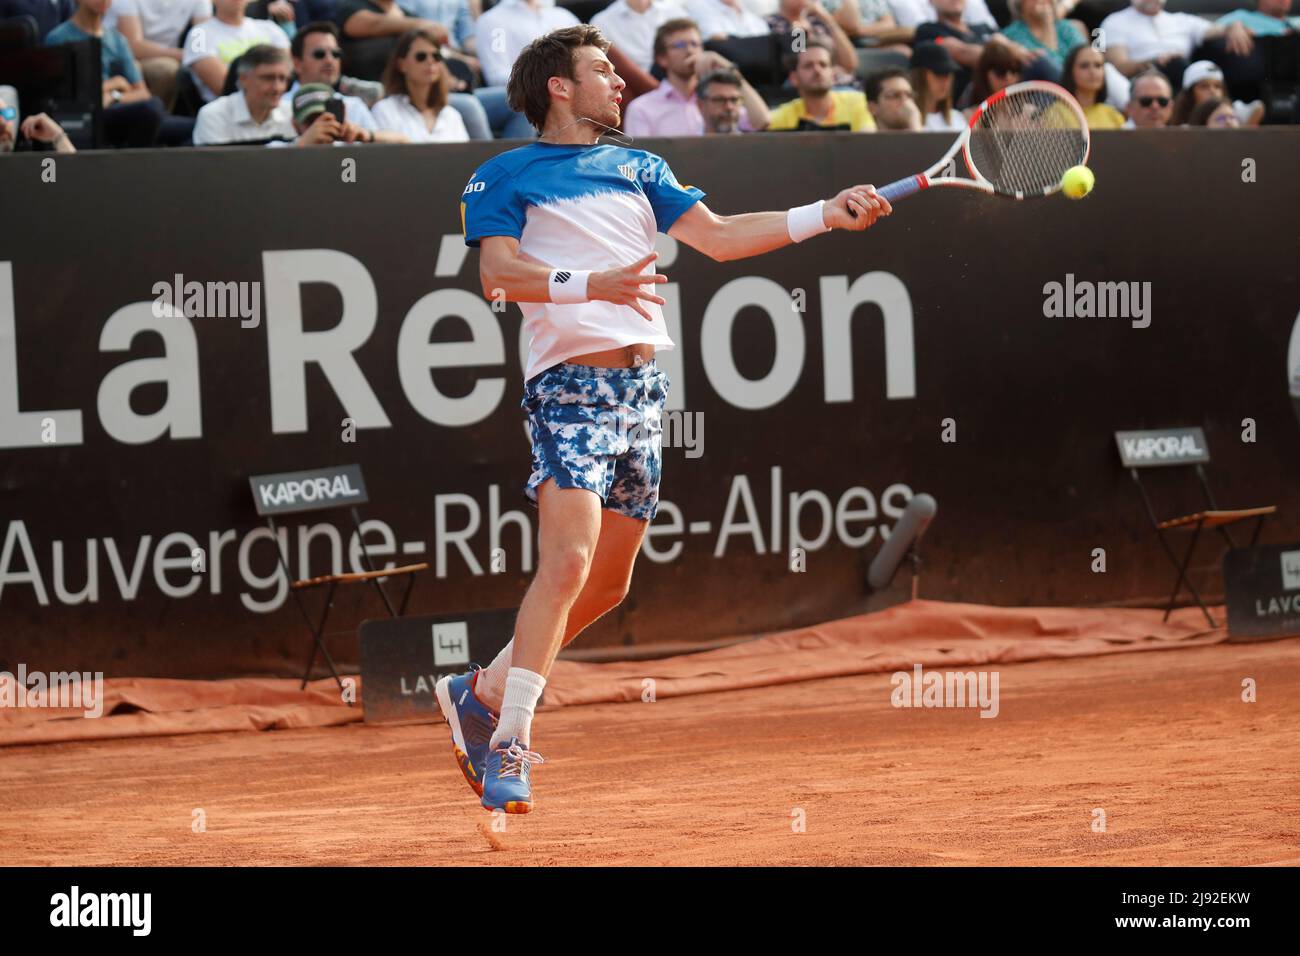 Lyon, France, May 19, 2022, Cameron NORRIE (GBR) during the Open Parc  Auvergne-Rhone-Alpes Lyon 2022, ATP 250 Tennis tournament on May 19, 2022  at Parc de la Tete d'Or in Lyon, France -